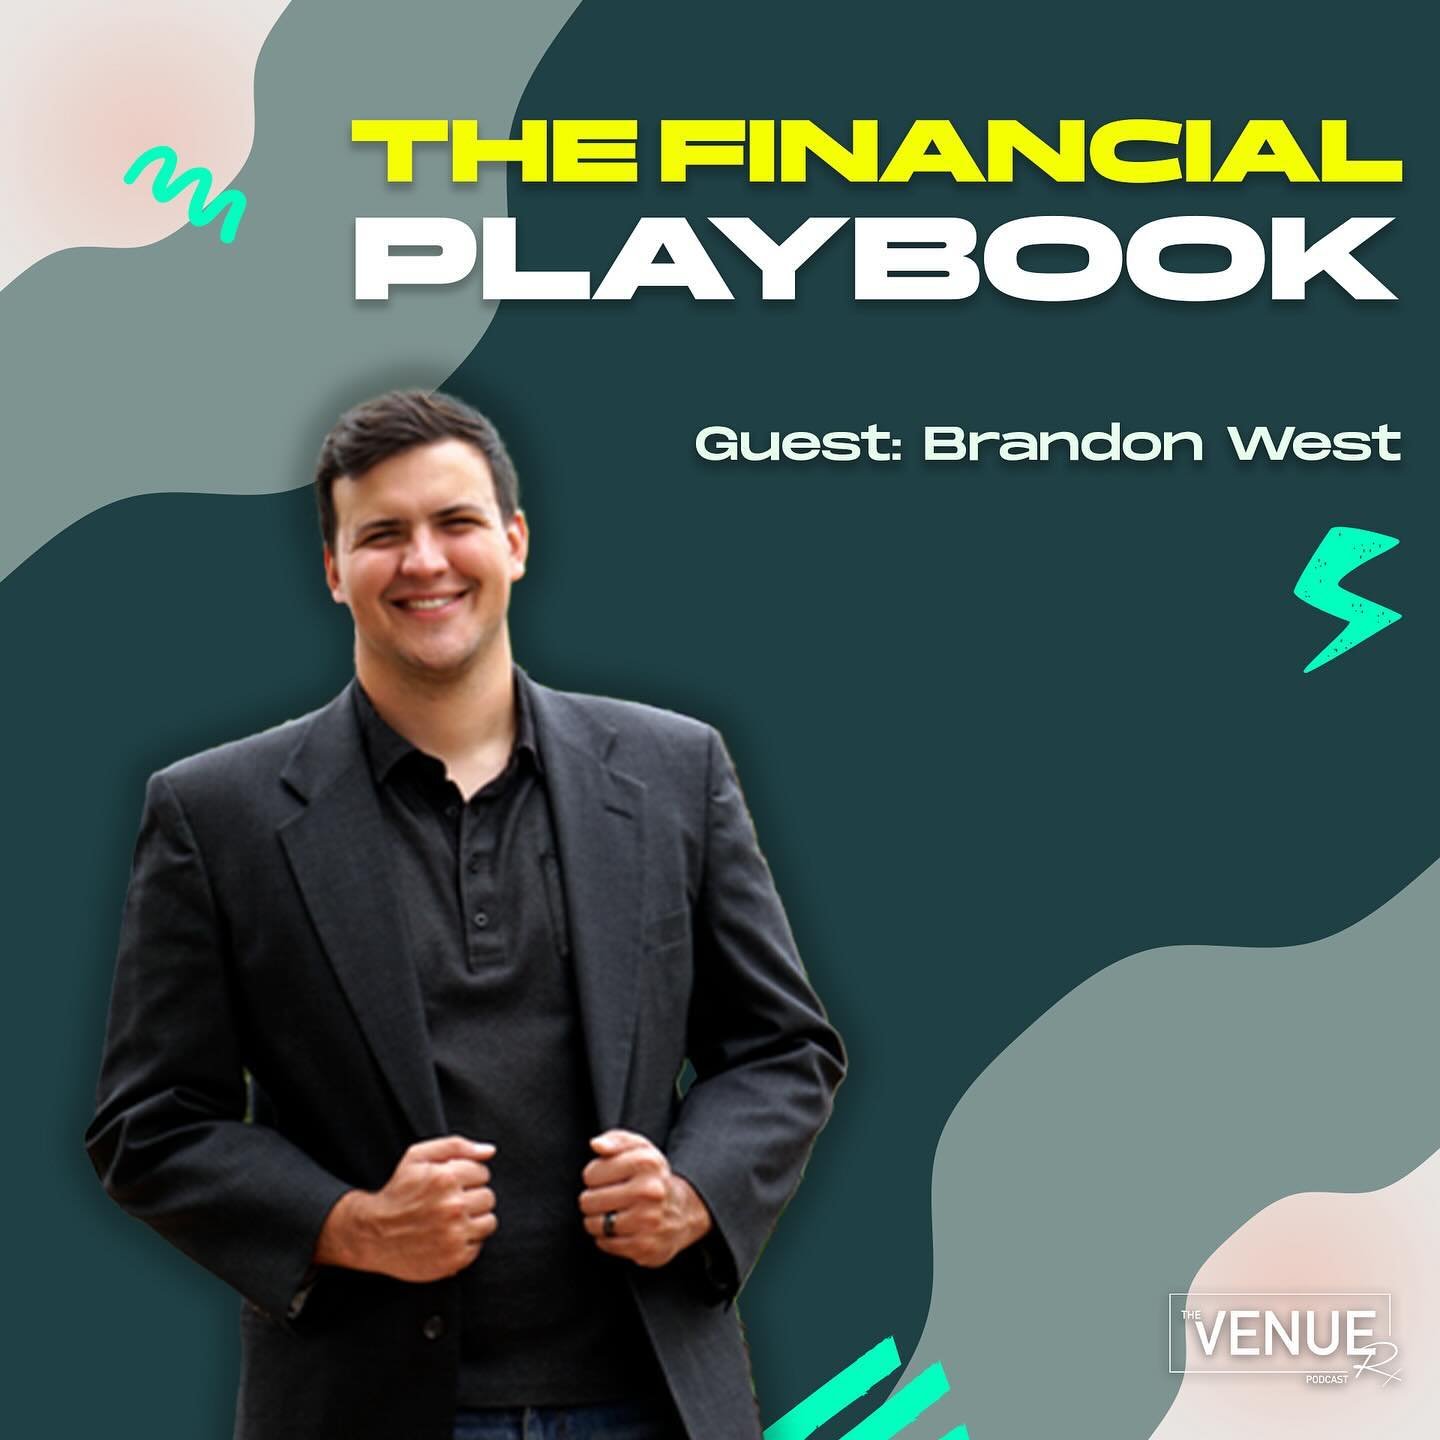 Season 7 Episode 7 Coming In Hot 🔥

In this weeks episode, our host @jonoaymin sits down with Brandon West, CPA and Co-Owner of 77 Financial Group. They cover the importance of separating funds owed to vendors from taxable income, advocating for the